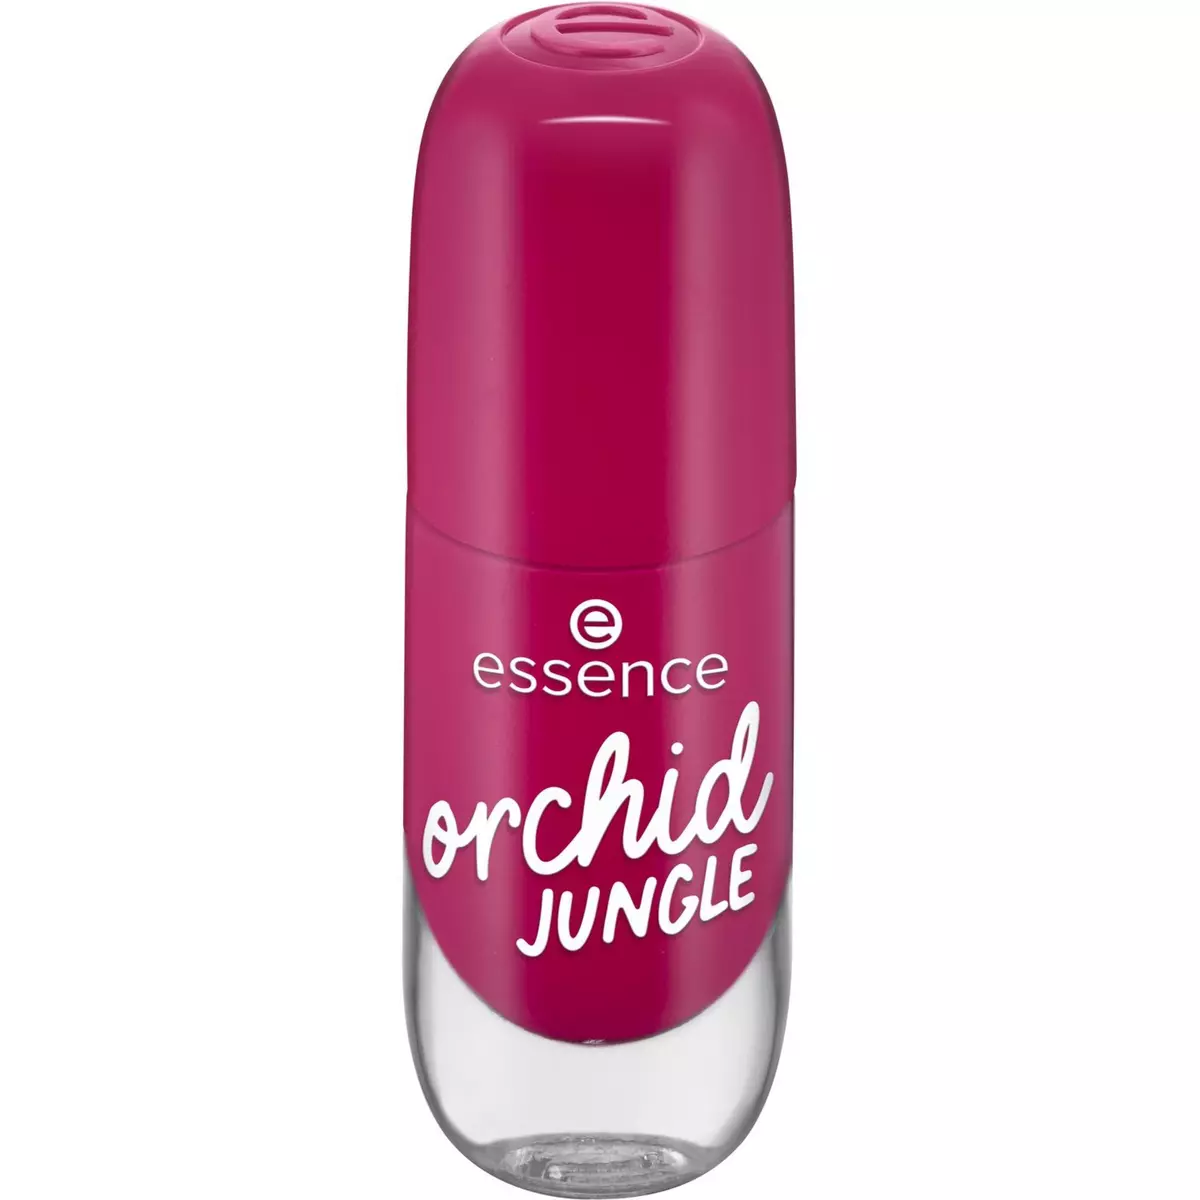 ESSENCE Vernis à ongles orchid jungle n°12 8ml